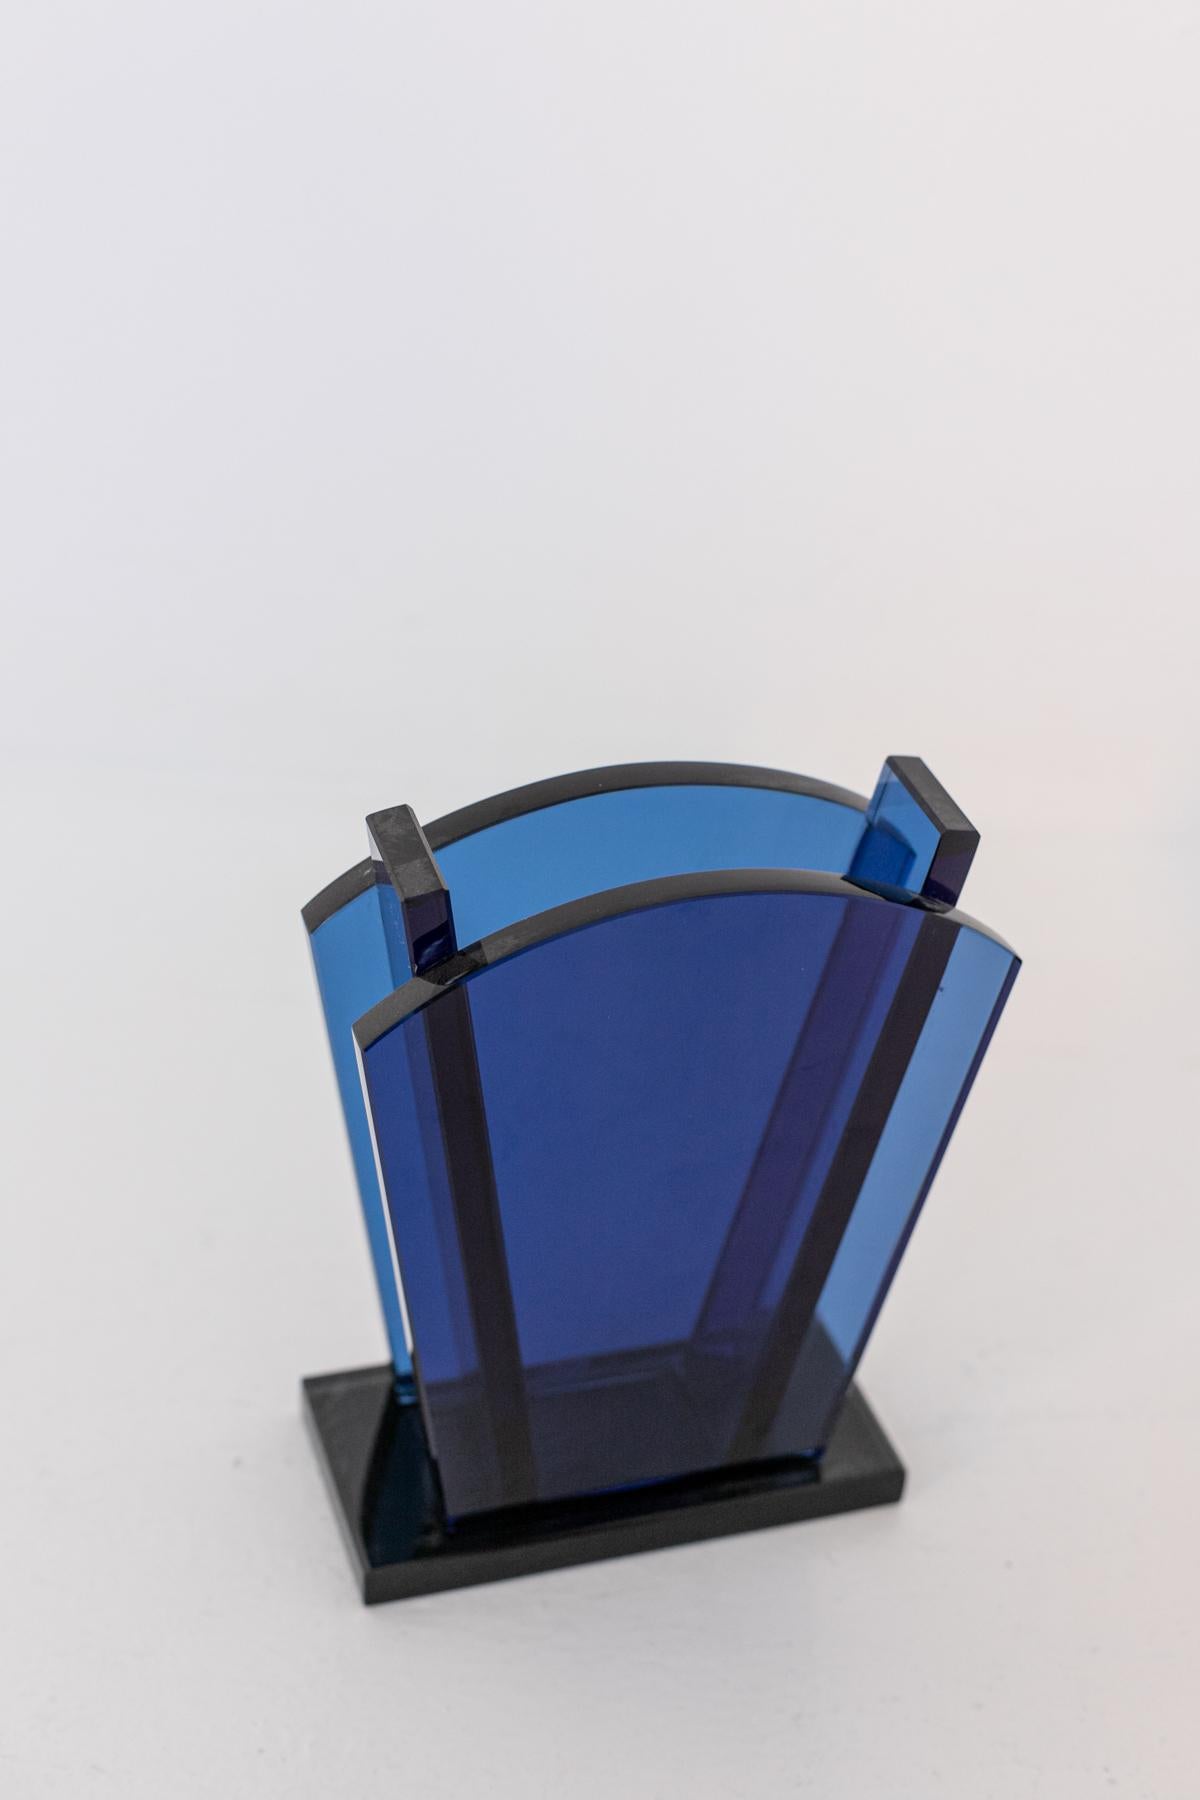 Sculptural vase by Ettore Sottsass for Fontana Arte from the late 1980s.The sculptural vase is made of blue glass and as you can see from the photos have a particular shape. The vase is part of a collection that Fontana Arte put into production in